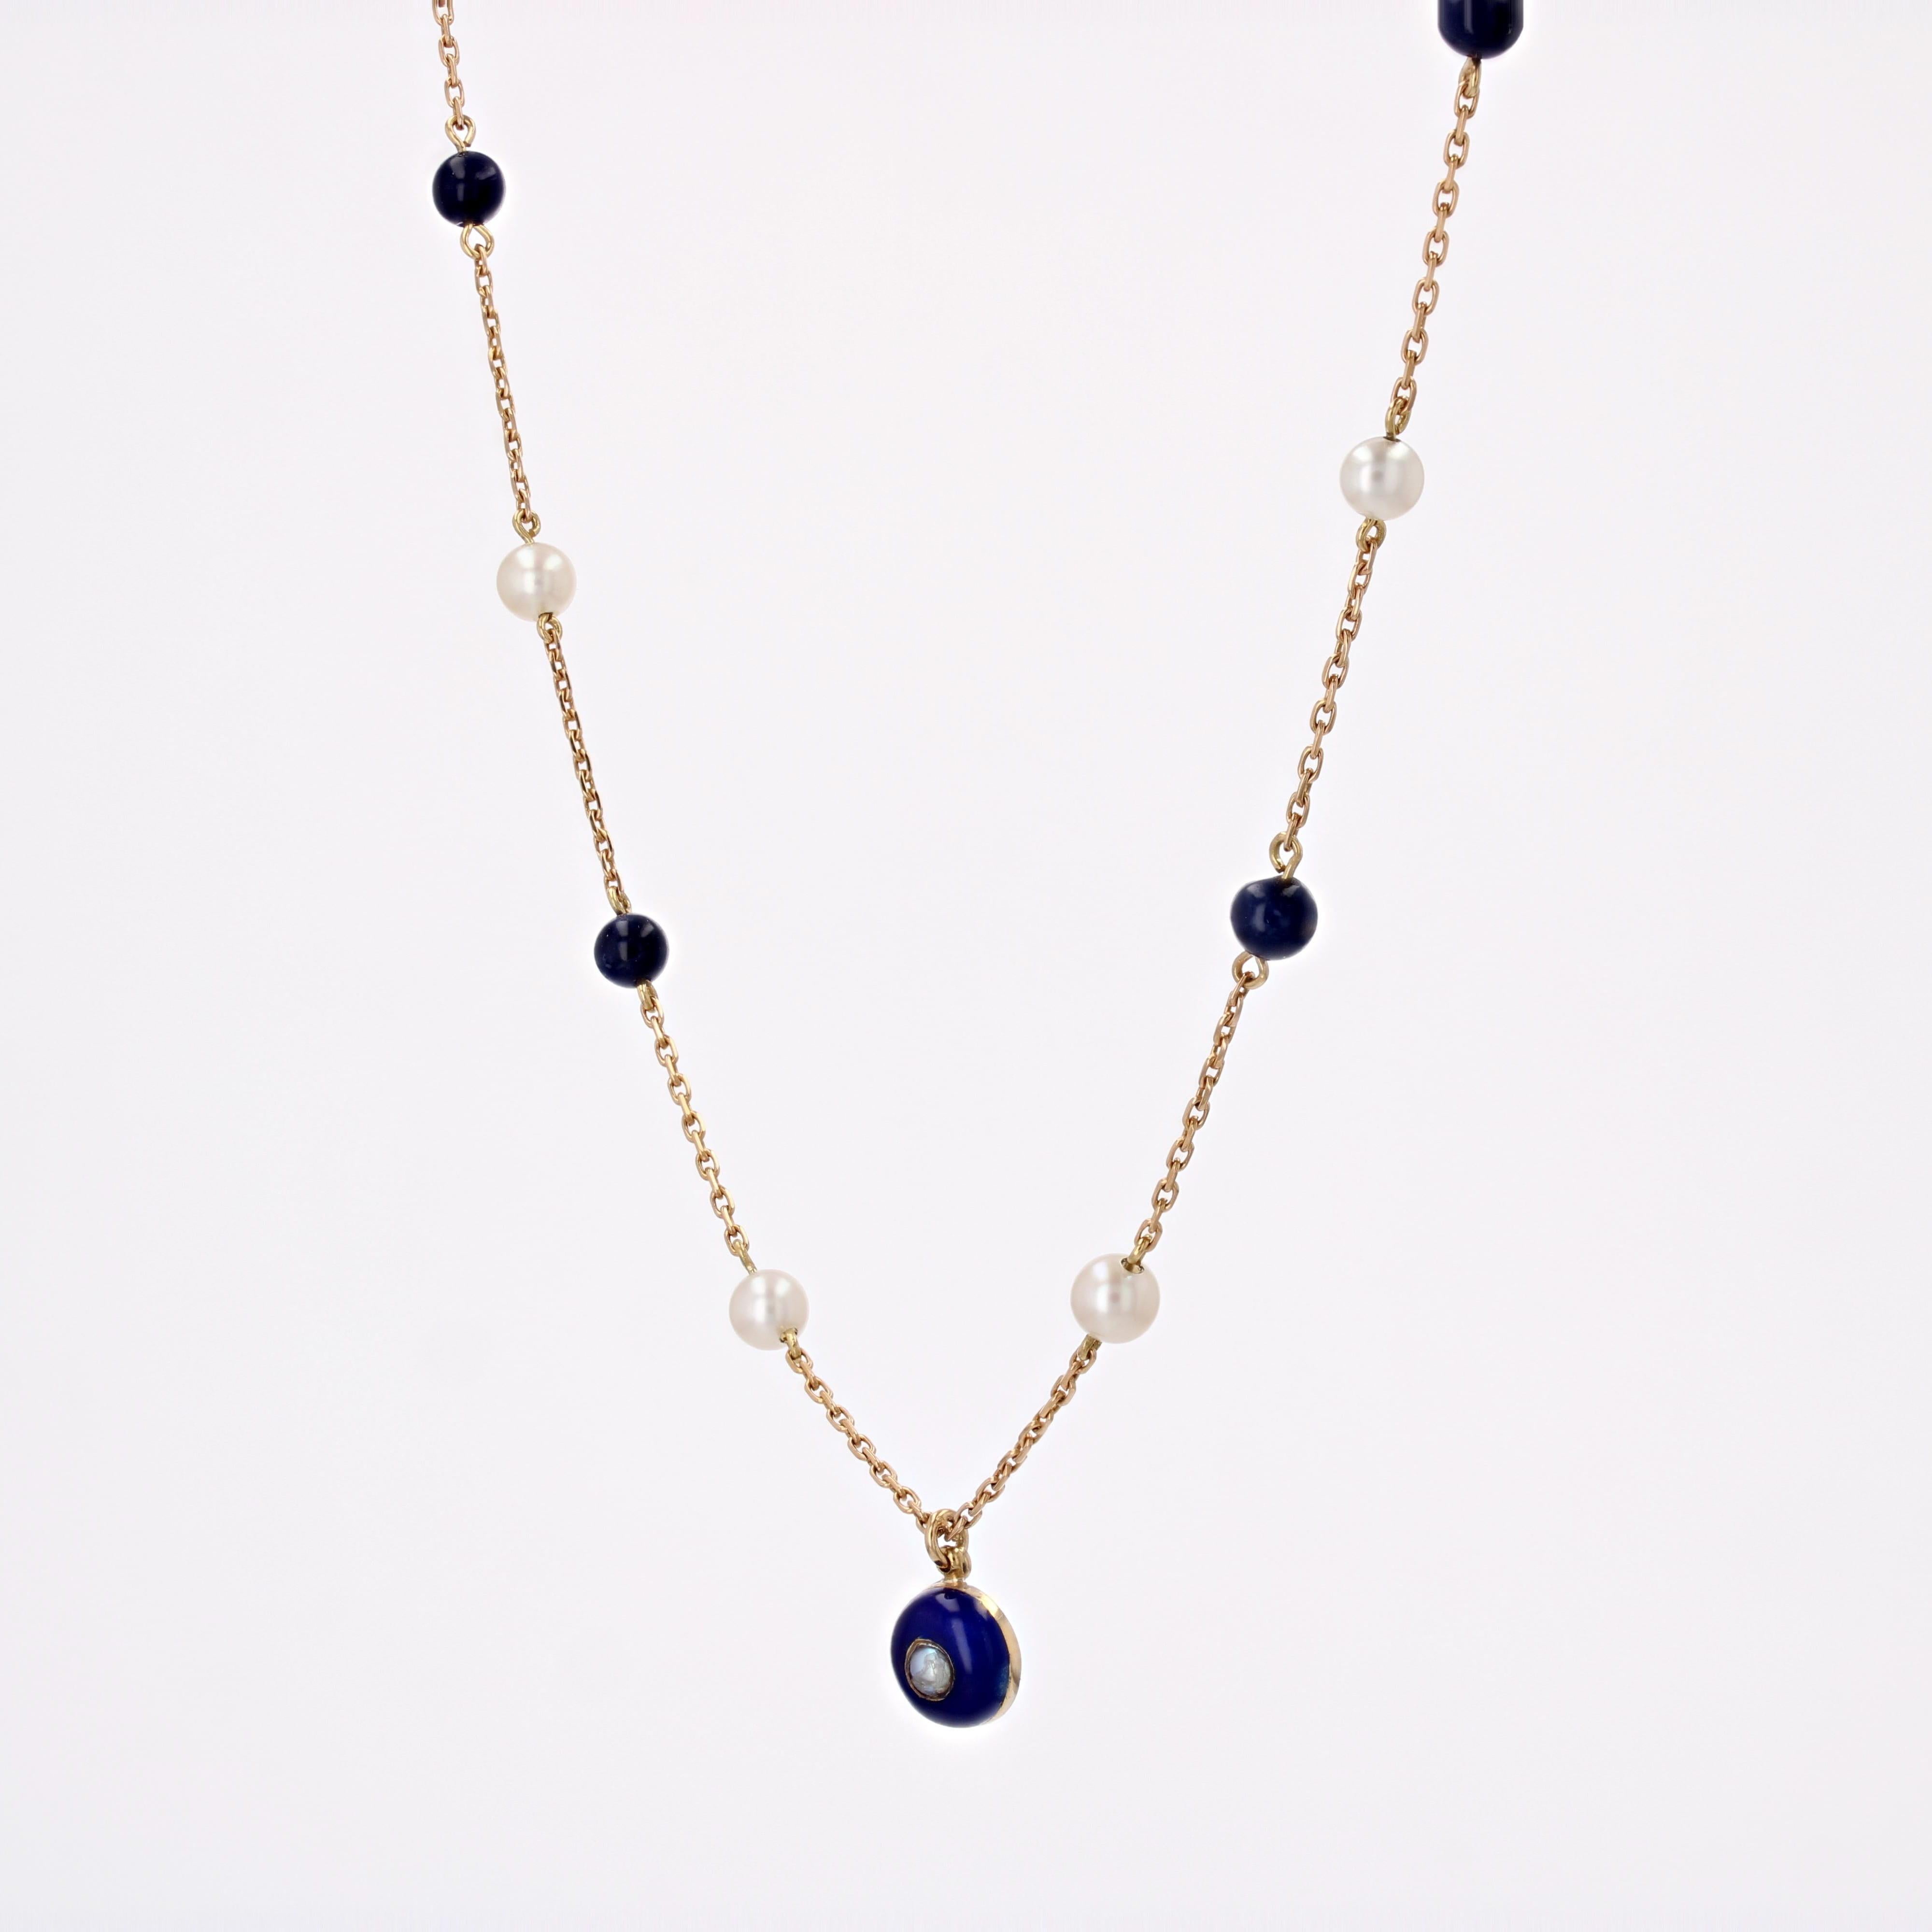 Napoleon III French 19th Century Pearls, Lapis Lazuli, Enamel and Gold Necklace